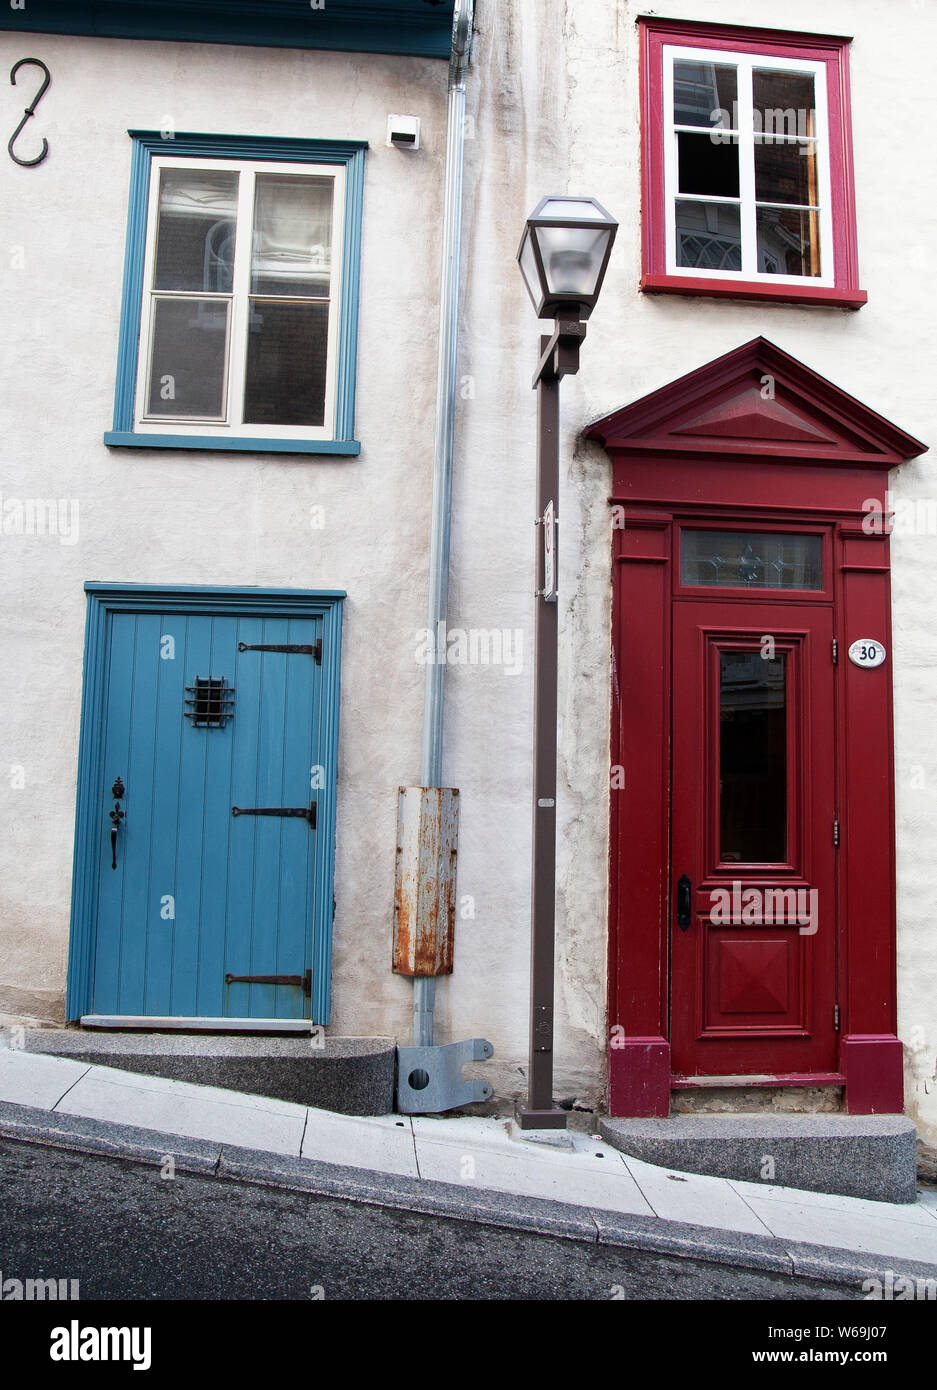 The oldest European settlement in North America, the walled city of Quebec, streets may go uphill, but the houses and house doors are straight. Stock Photo